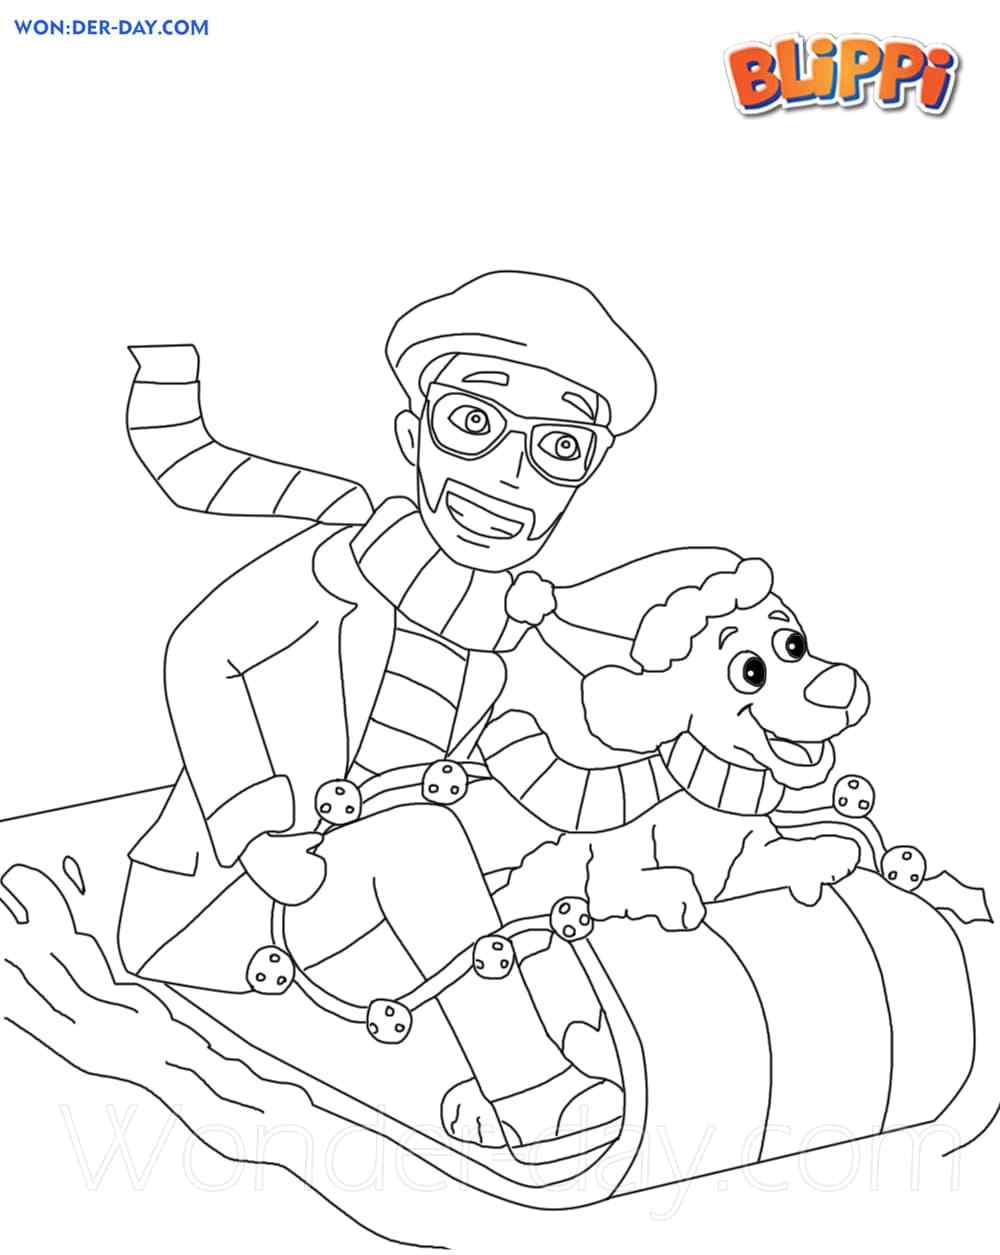 Blippi And The Dog Ride A Sleigh